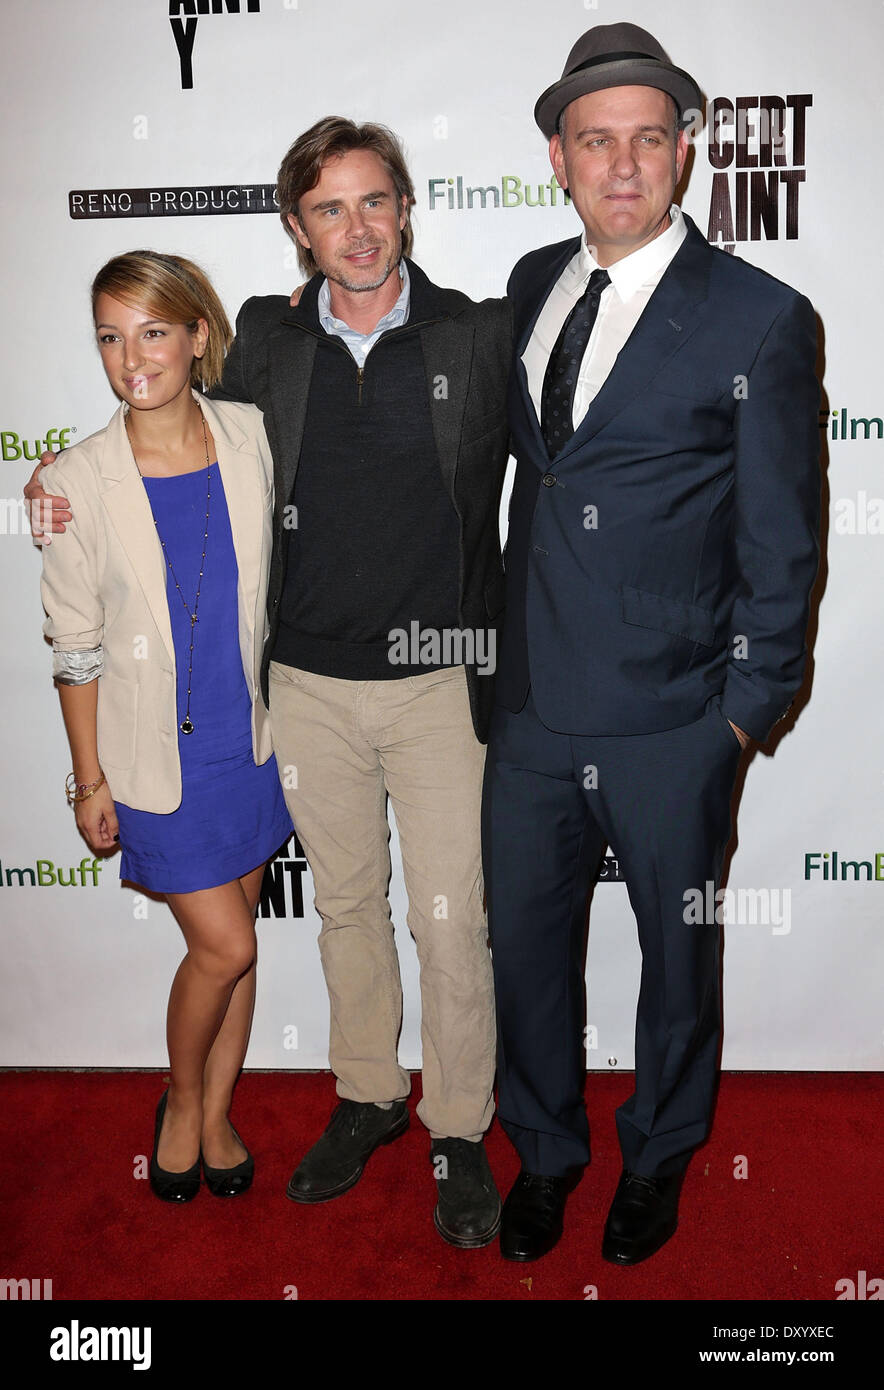 The Los Angeles premiere of 'Certainty' at Laemmle Music Hall - Arrivals Featuring: Vanessa Lengies,Sam Trammell,Mike O'Malley Where: Los Angeles California USA When: 27 Nov 2012 Stock Photo